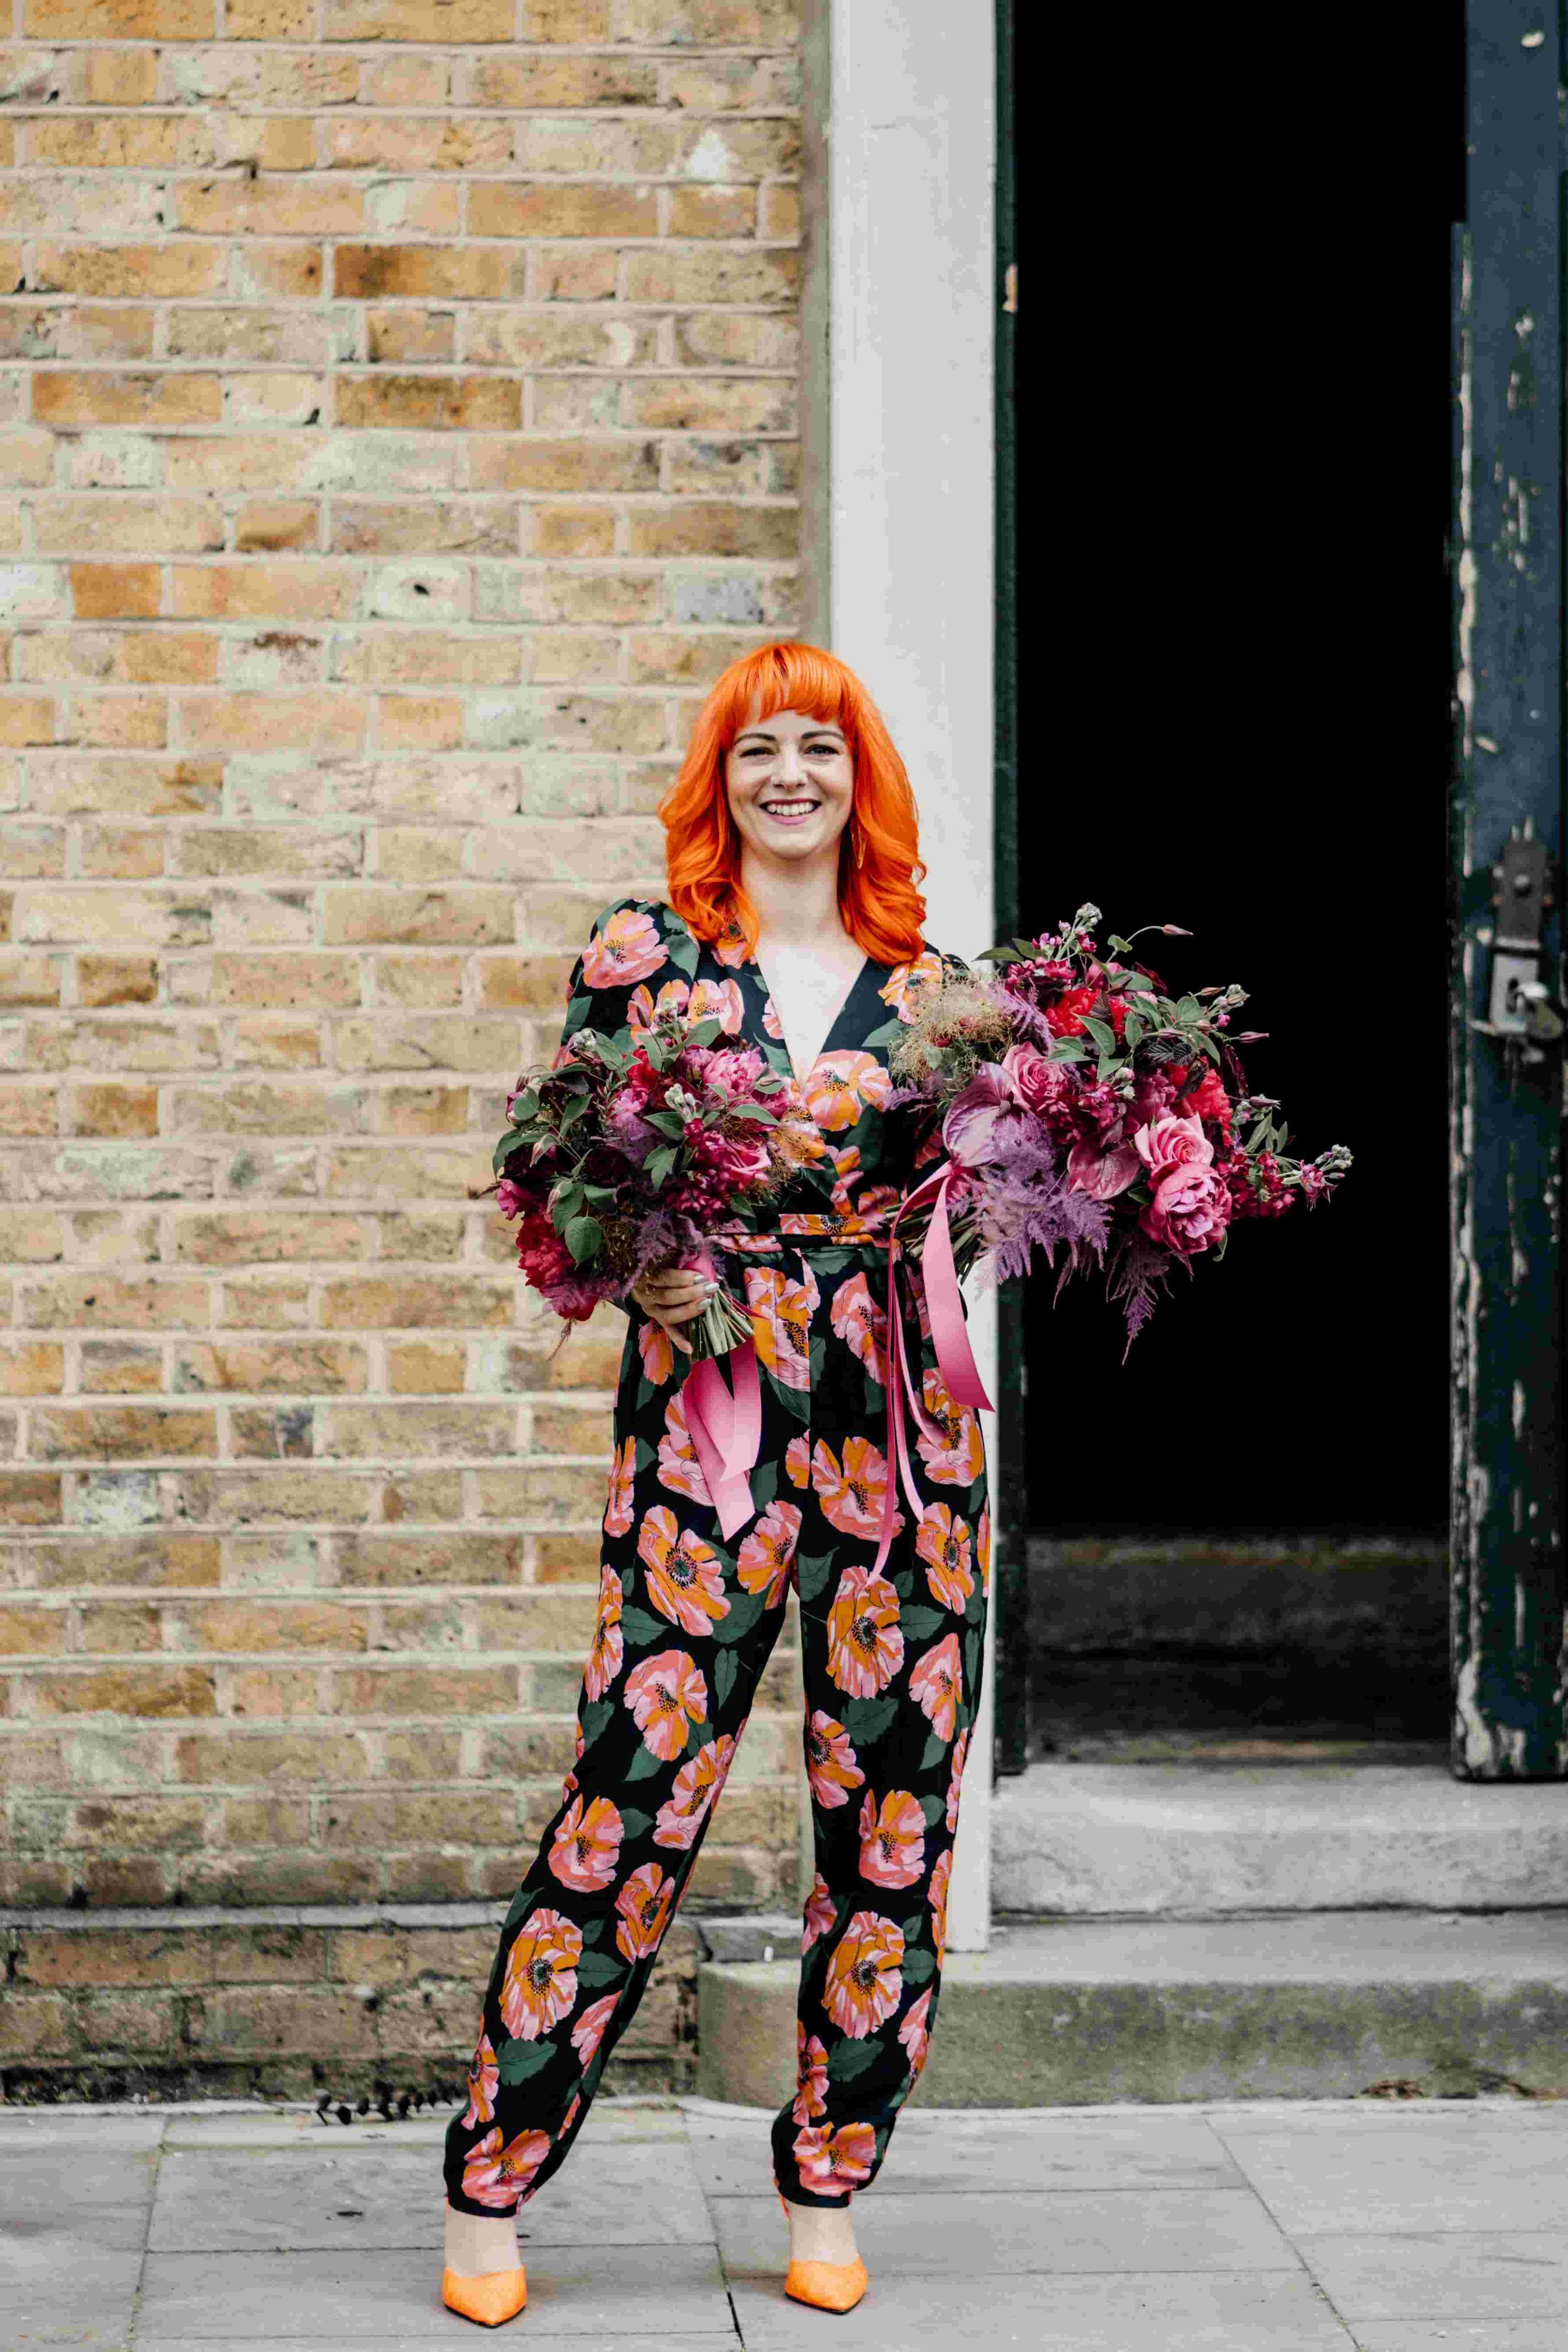  Photo by: Tom Wyatt Photography  Non-traditional humanist celebrant is stood outside, smiling at the camera and holding two large colourful wedding bouquets. She is wearing a floral long sleeved jumpsuit and orange heels which match her hair.  